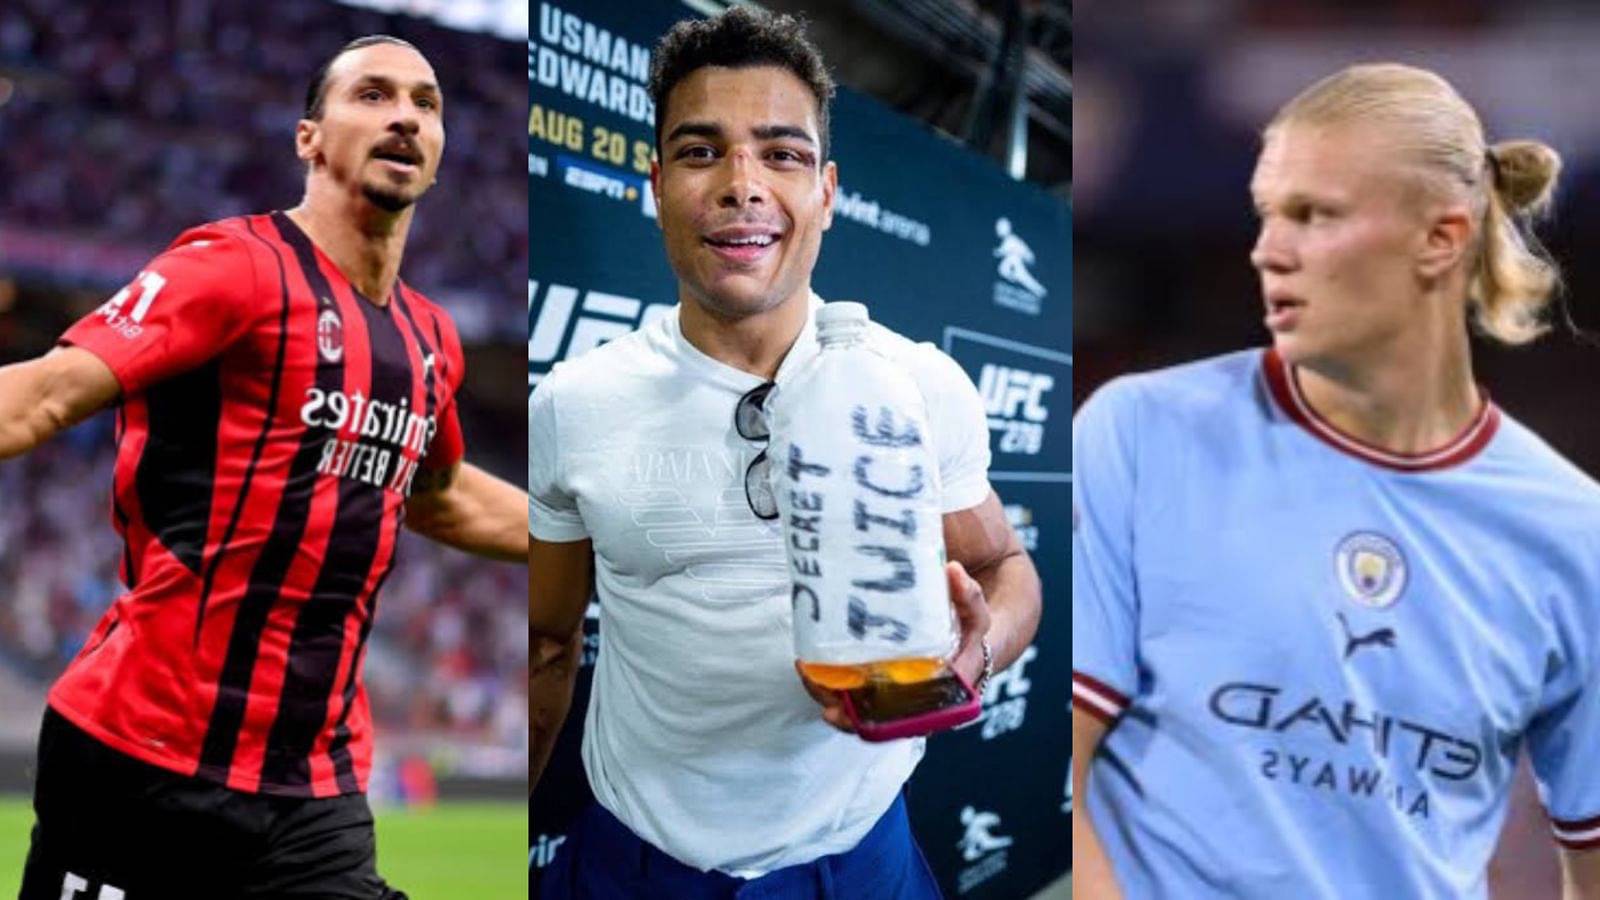 Paulo Costa Hilariously Claims to Have Helped Erling Haaland, Zlatan  Ibrahimović, and Mario Balotelli With His 'Secret Juice' - The SportsRush